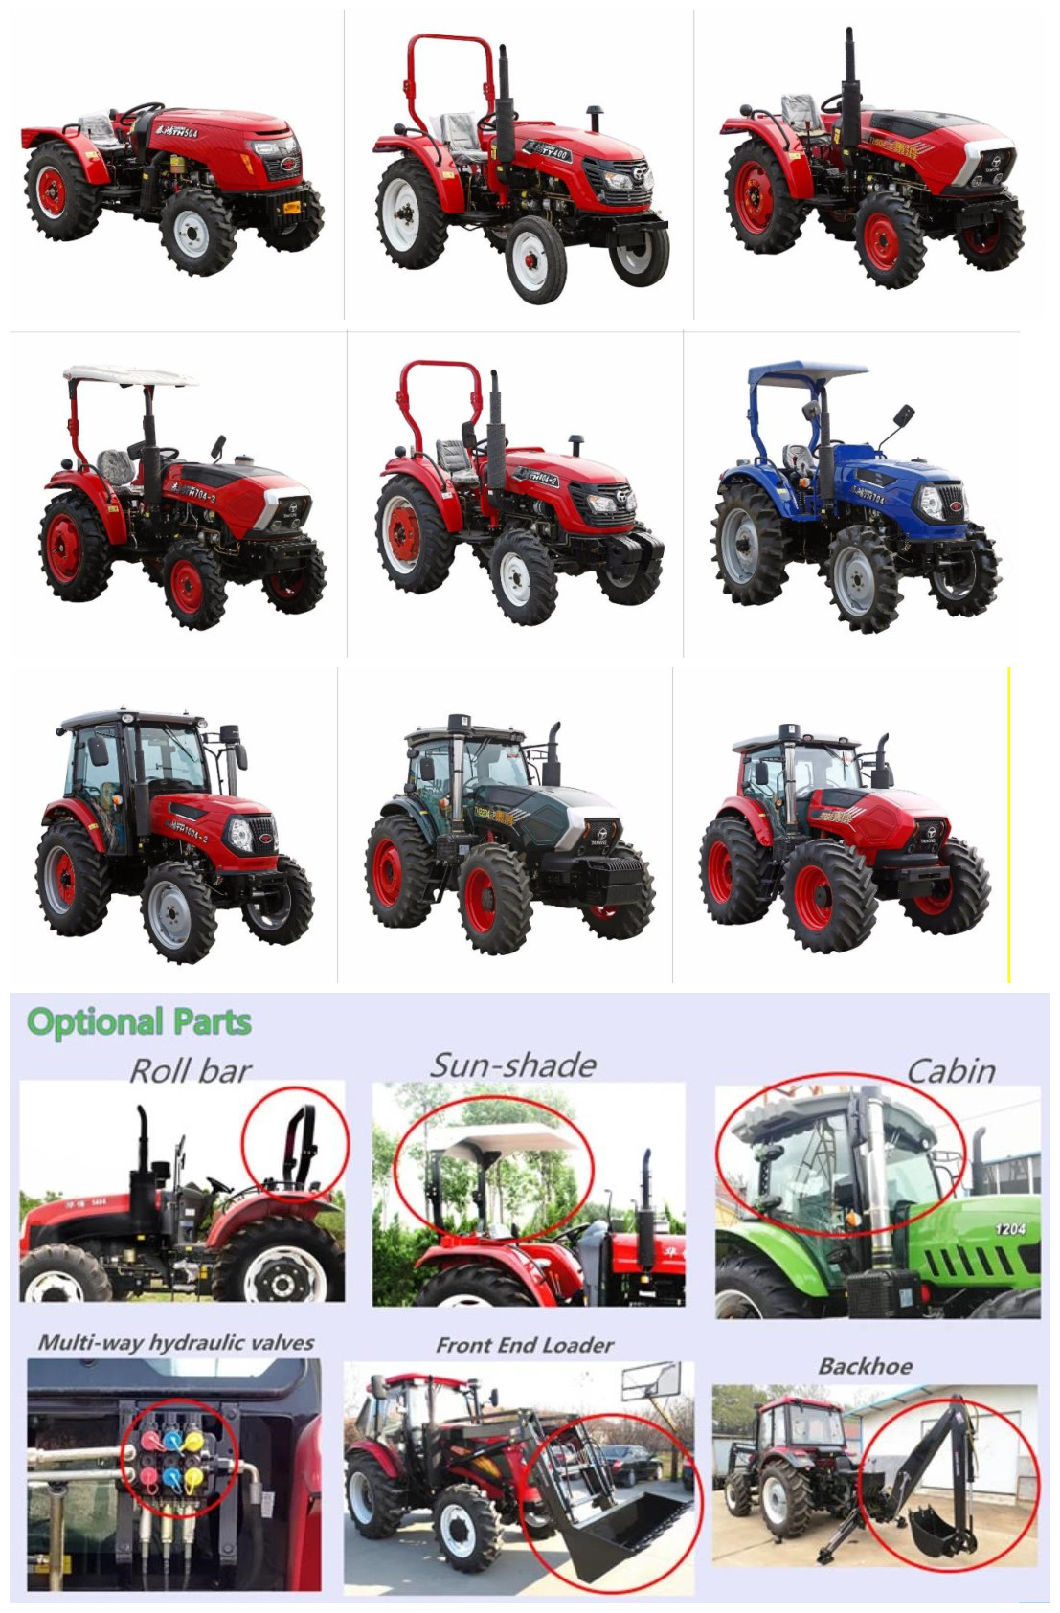 China Factory Supply 35 HP Tractor, 354 Mini Tractor, Th 354 Farm Tractor, Agricultural Tractor